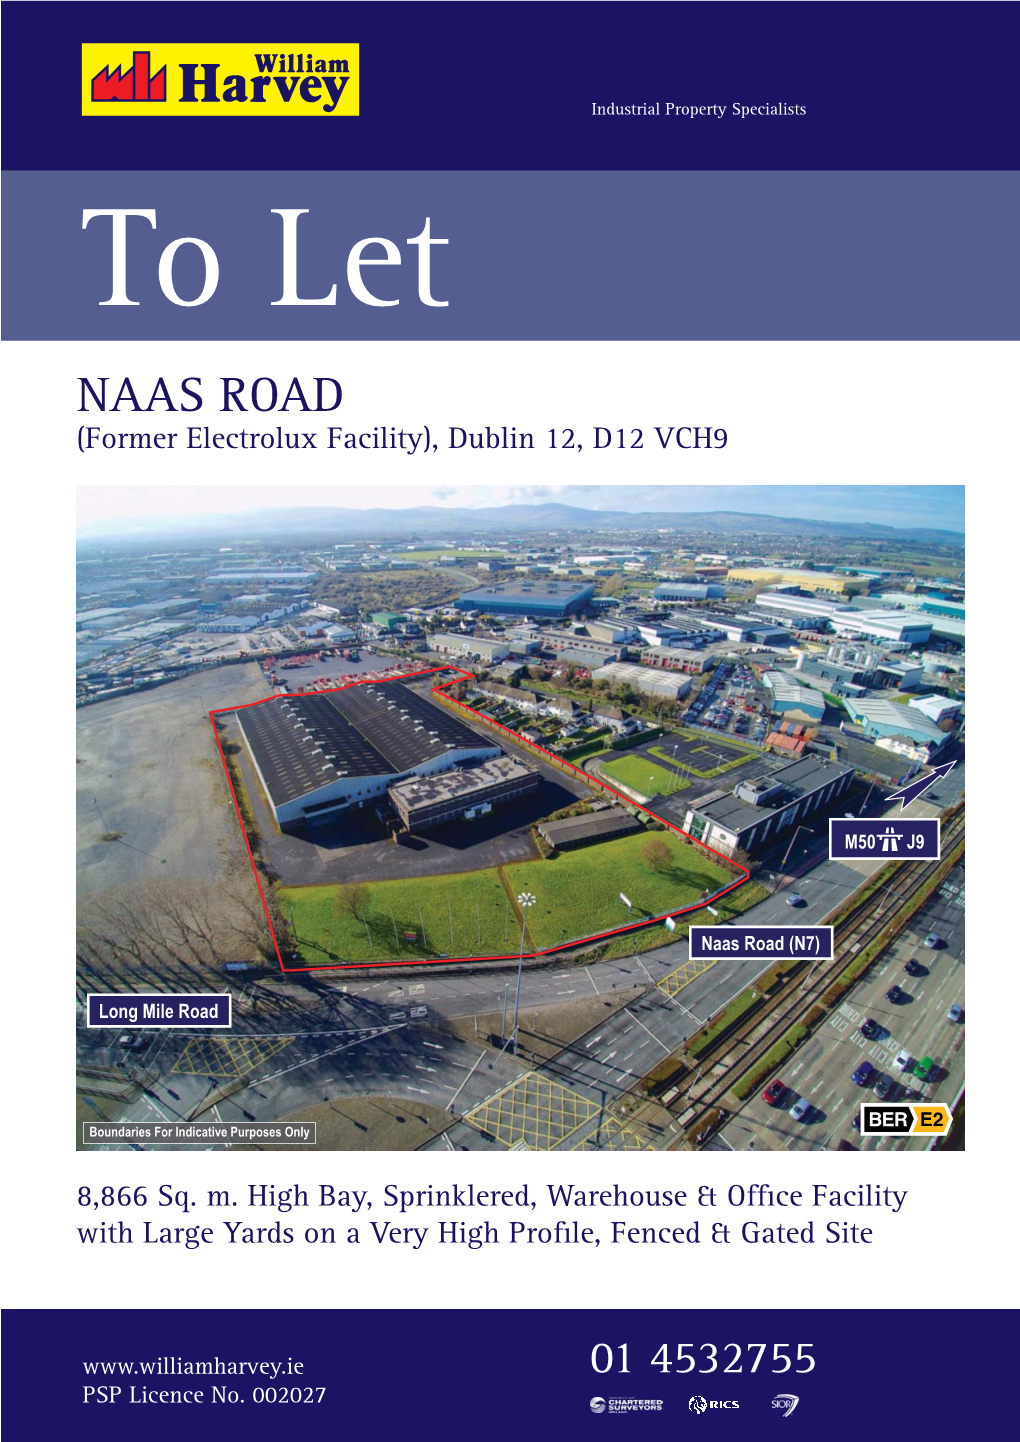 Naas-Road-Former-Electrolux-Facility